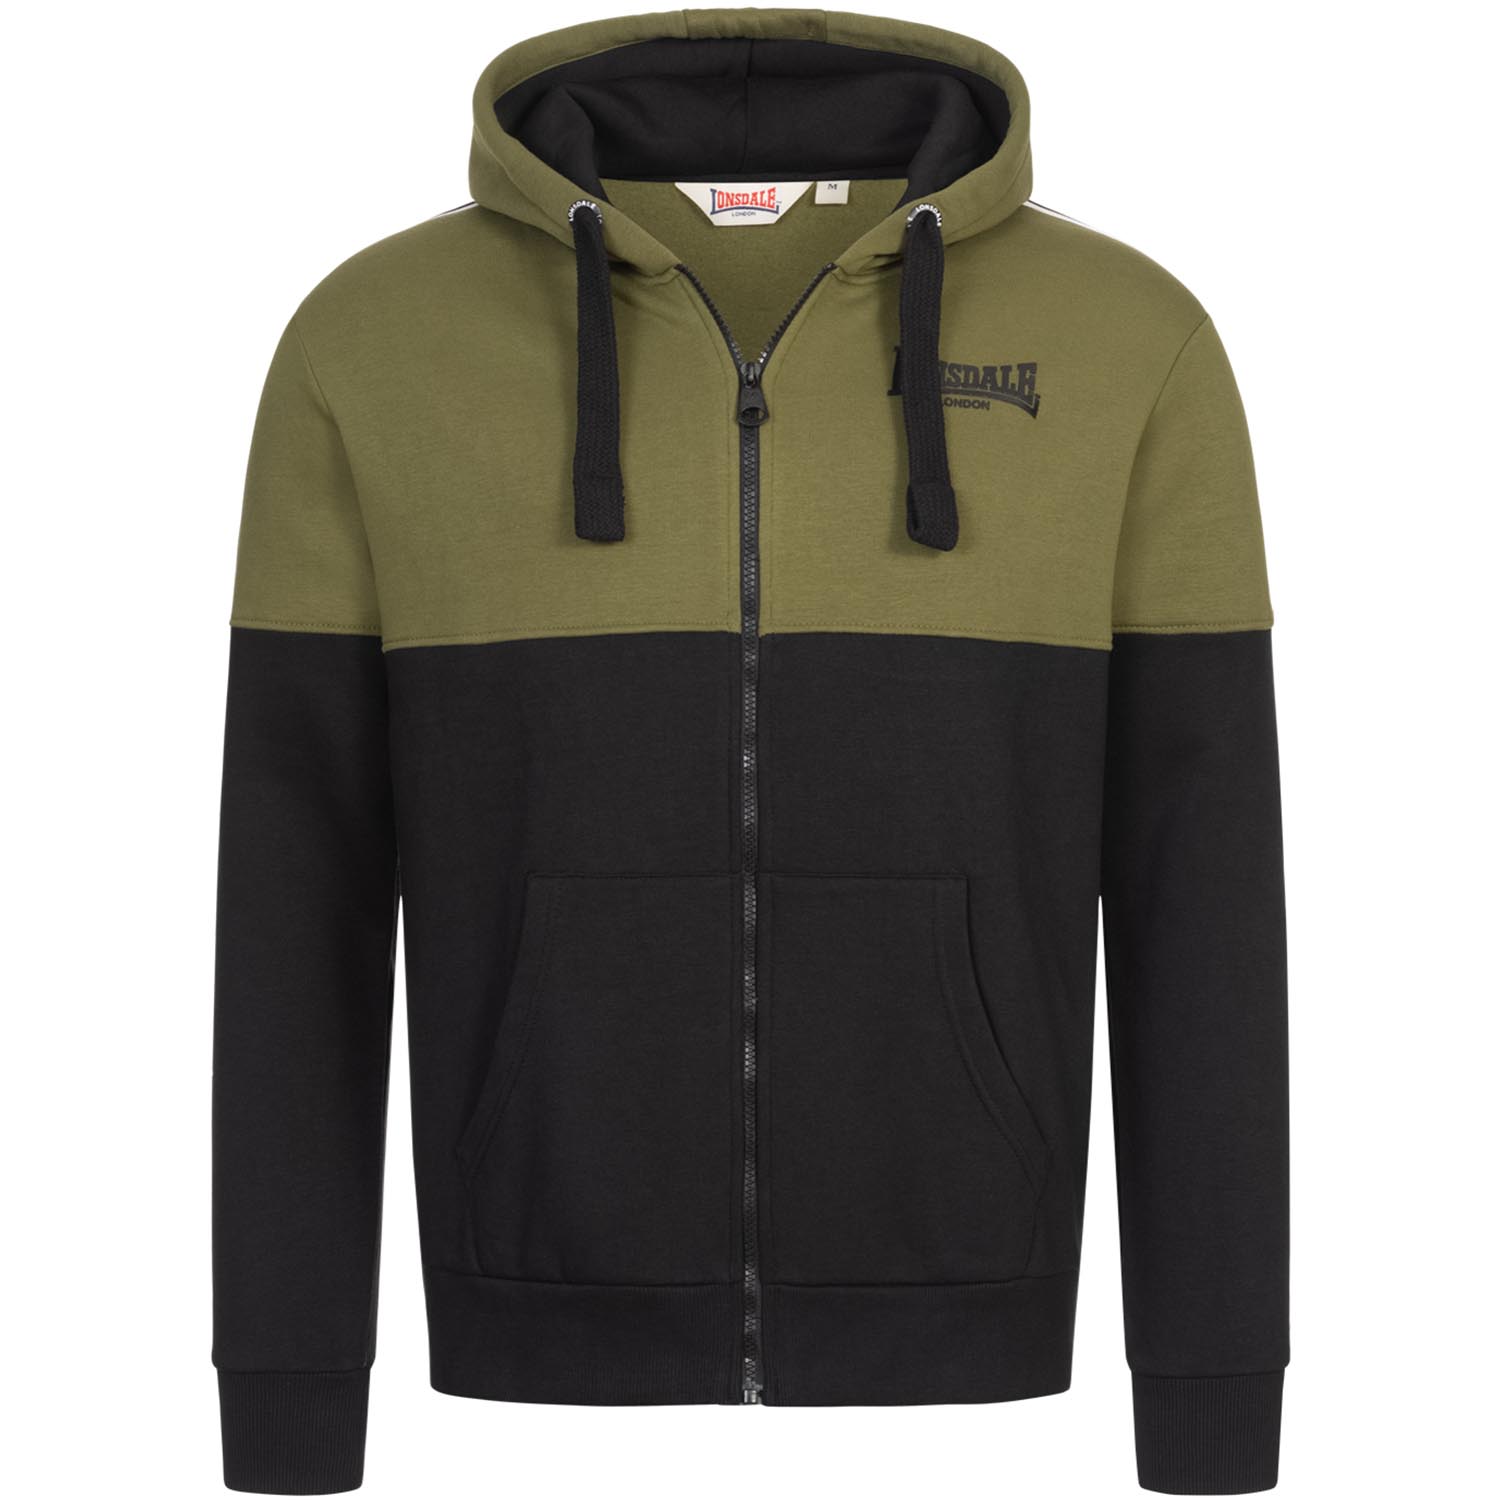 Lonsdale Hoody, Lucklawhill, olive, S